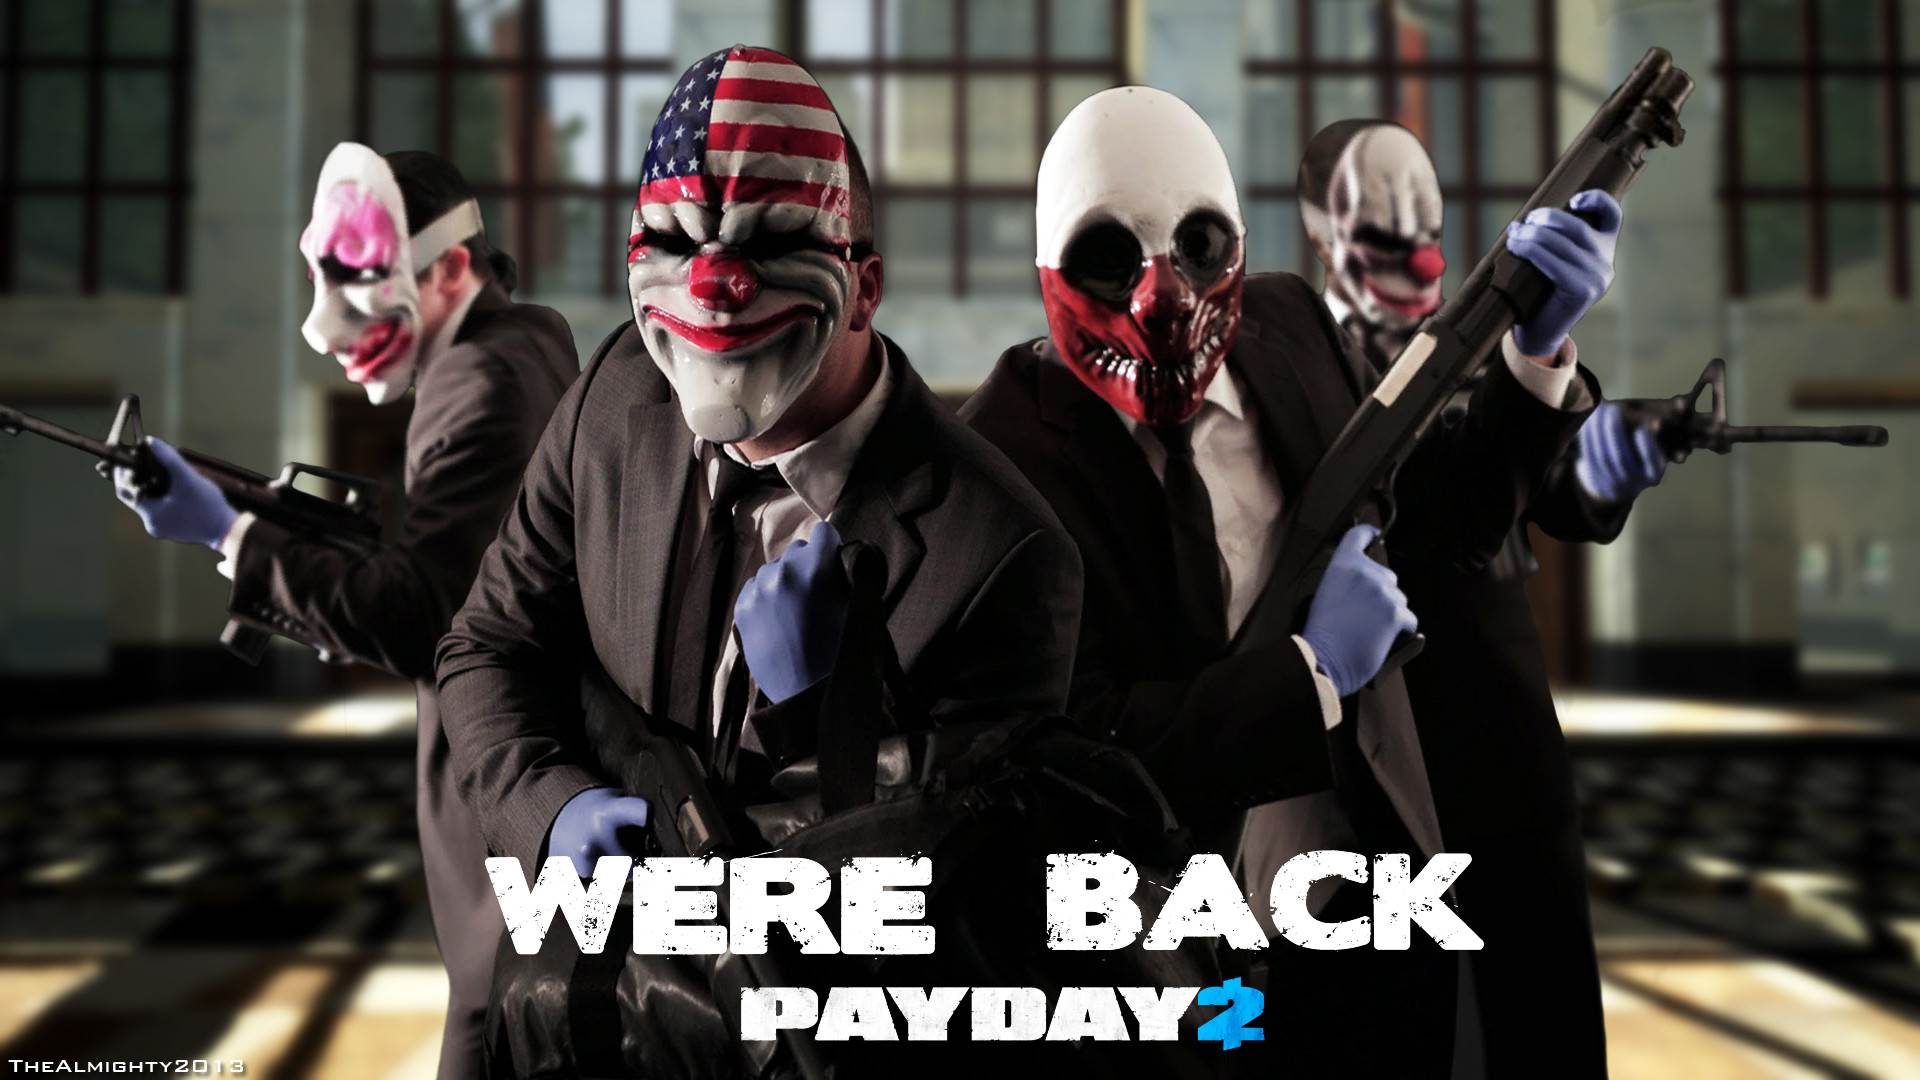 1920x1080 Payday 2 Wallpapers in 1080P HD